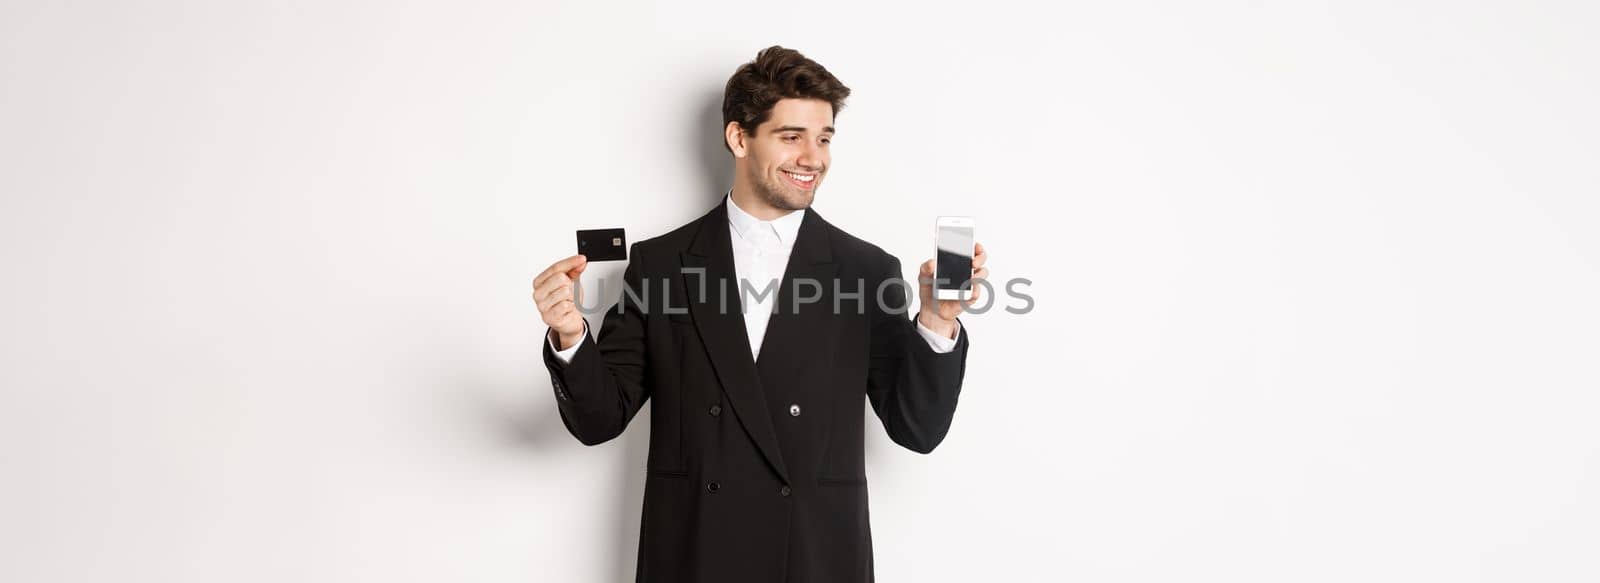 Handsome successful businessman, looking at smartphone screen and showing credit card, standing in black suit against white background.